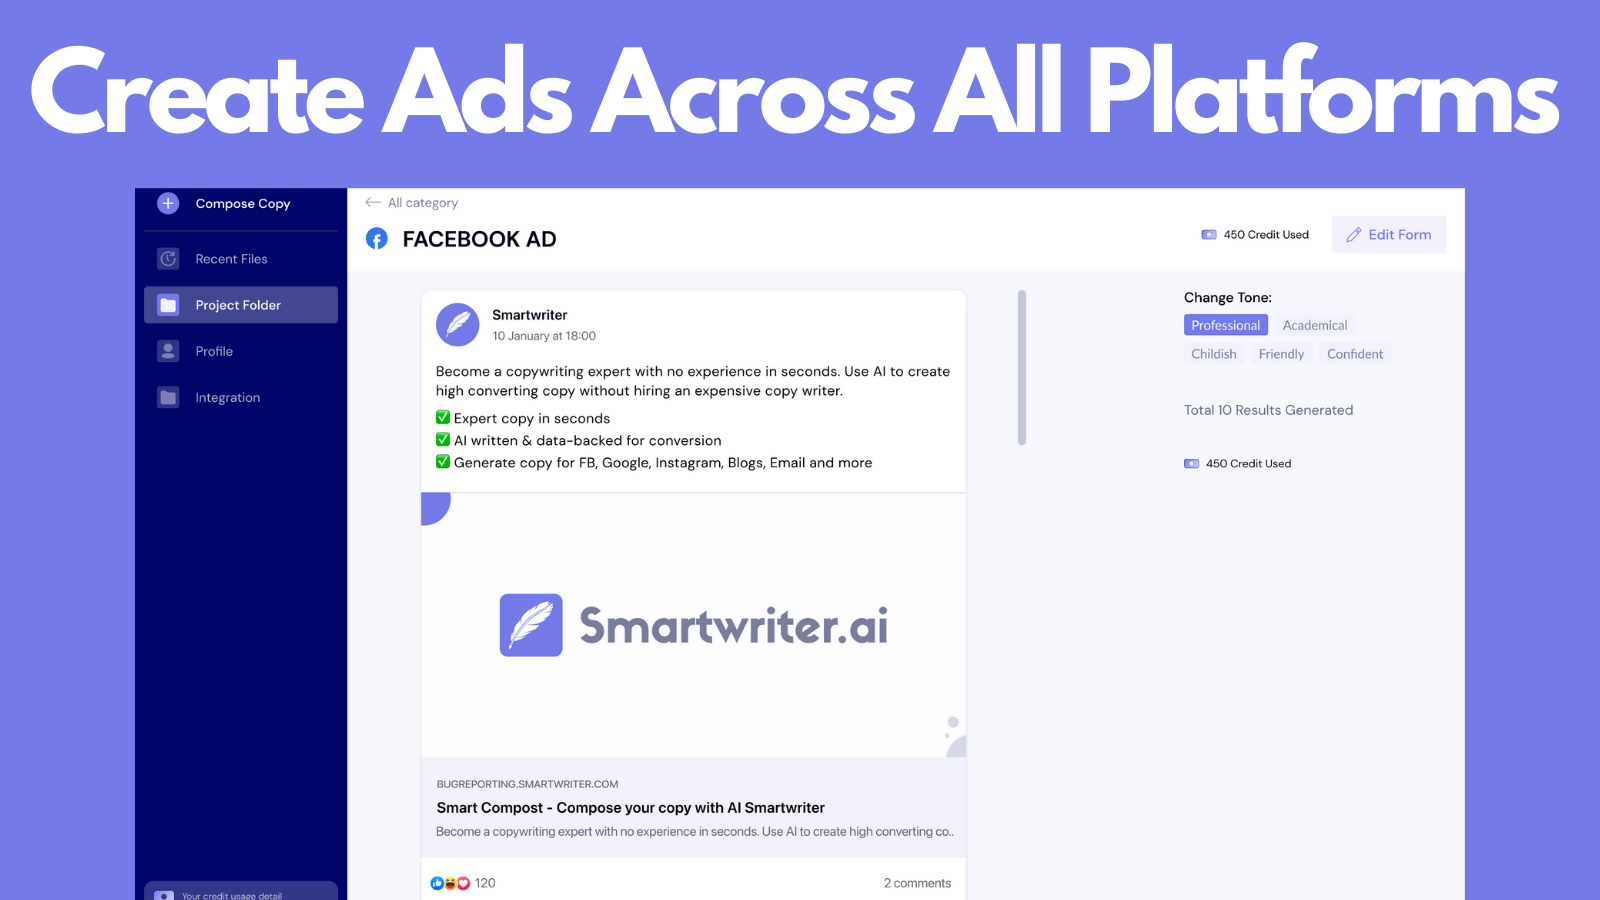 AI will create Ads for you across all platforms